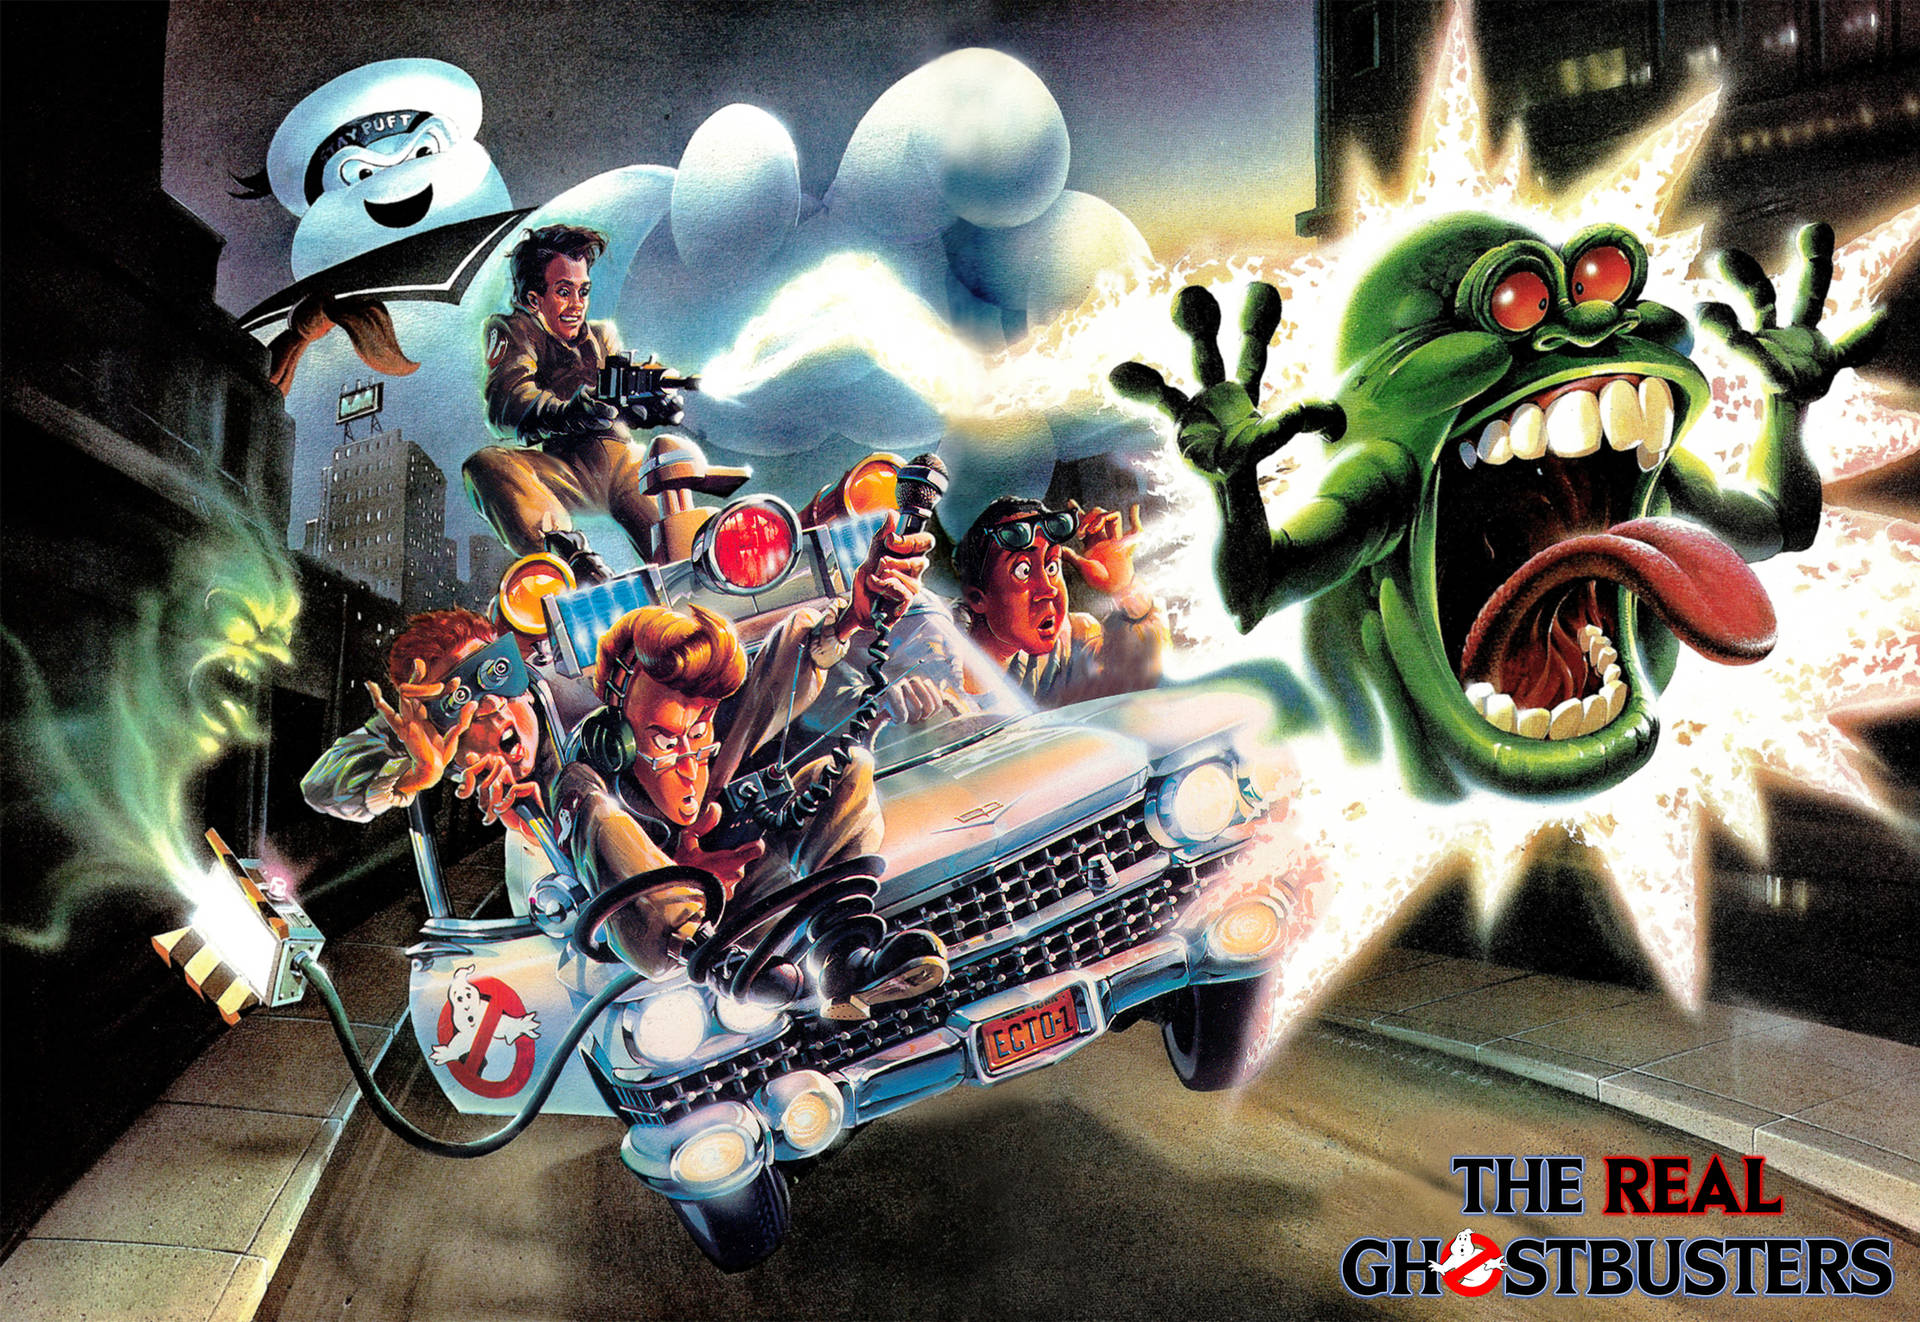 Dr. Peter Venkman, Winston Zeddemore, Ray Stantz And Egon Spengler, The Real Ghostbusters Background